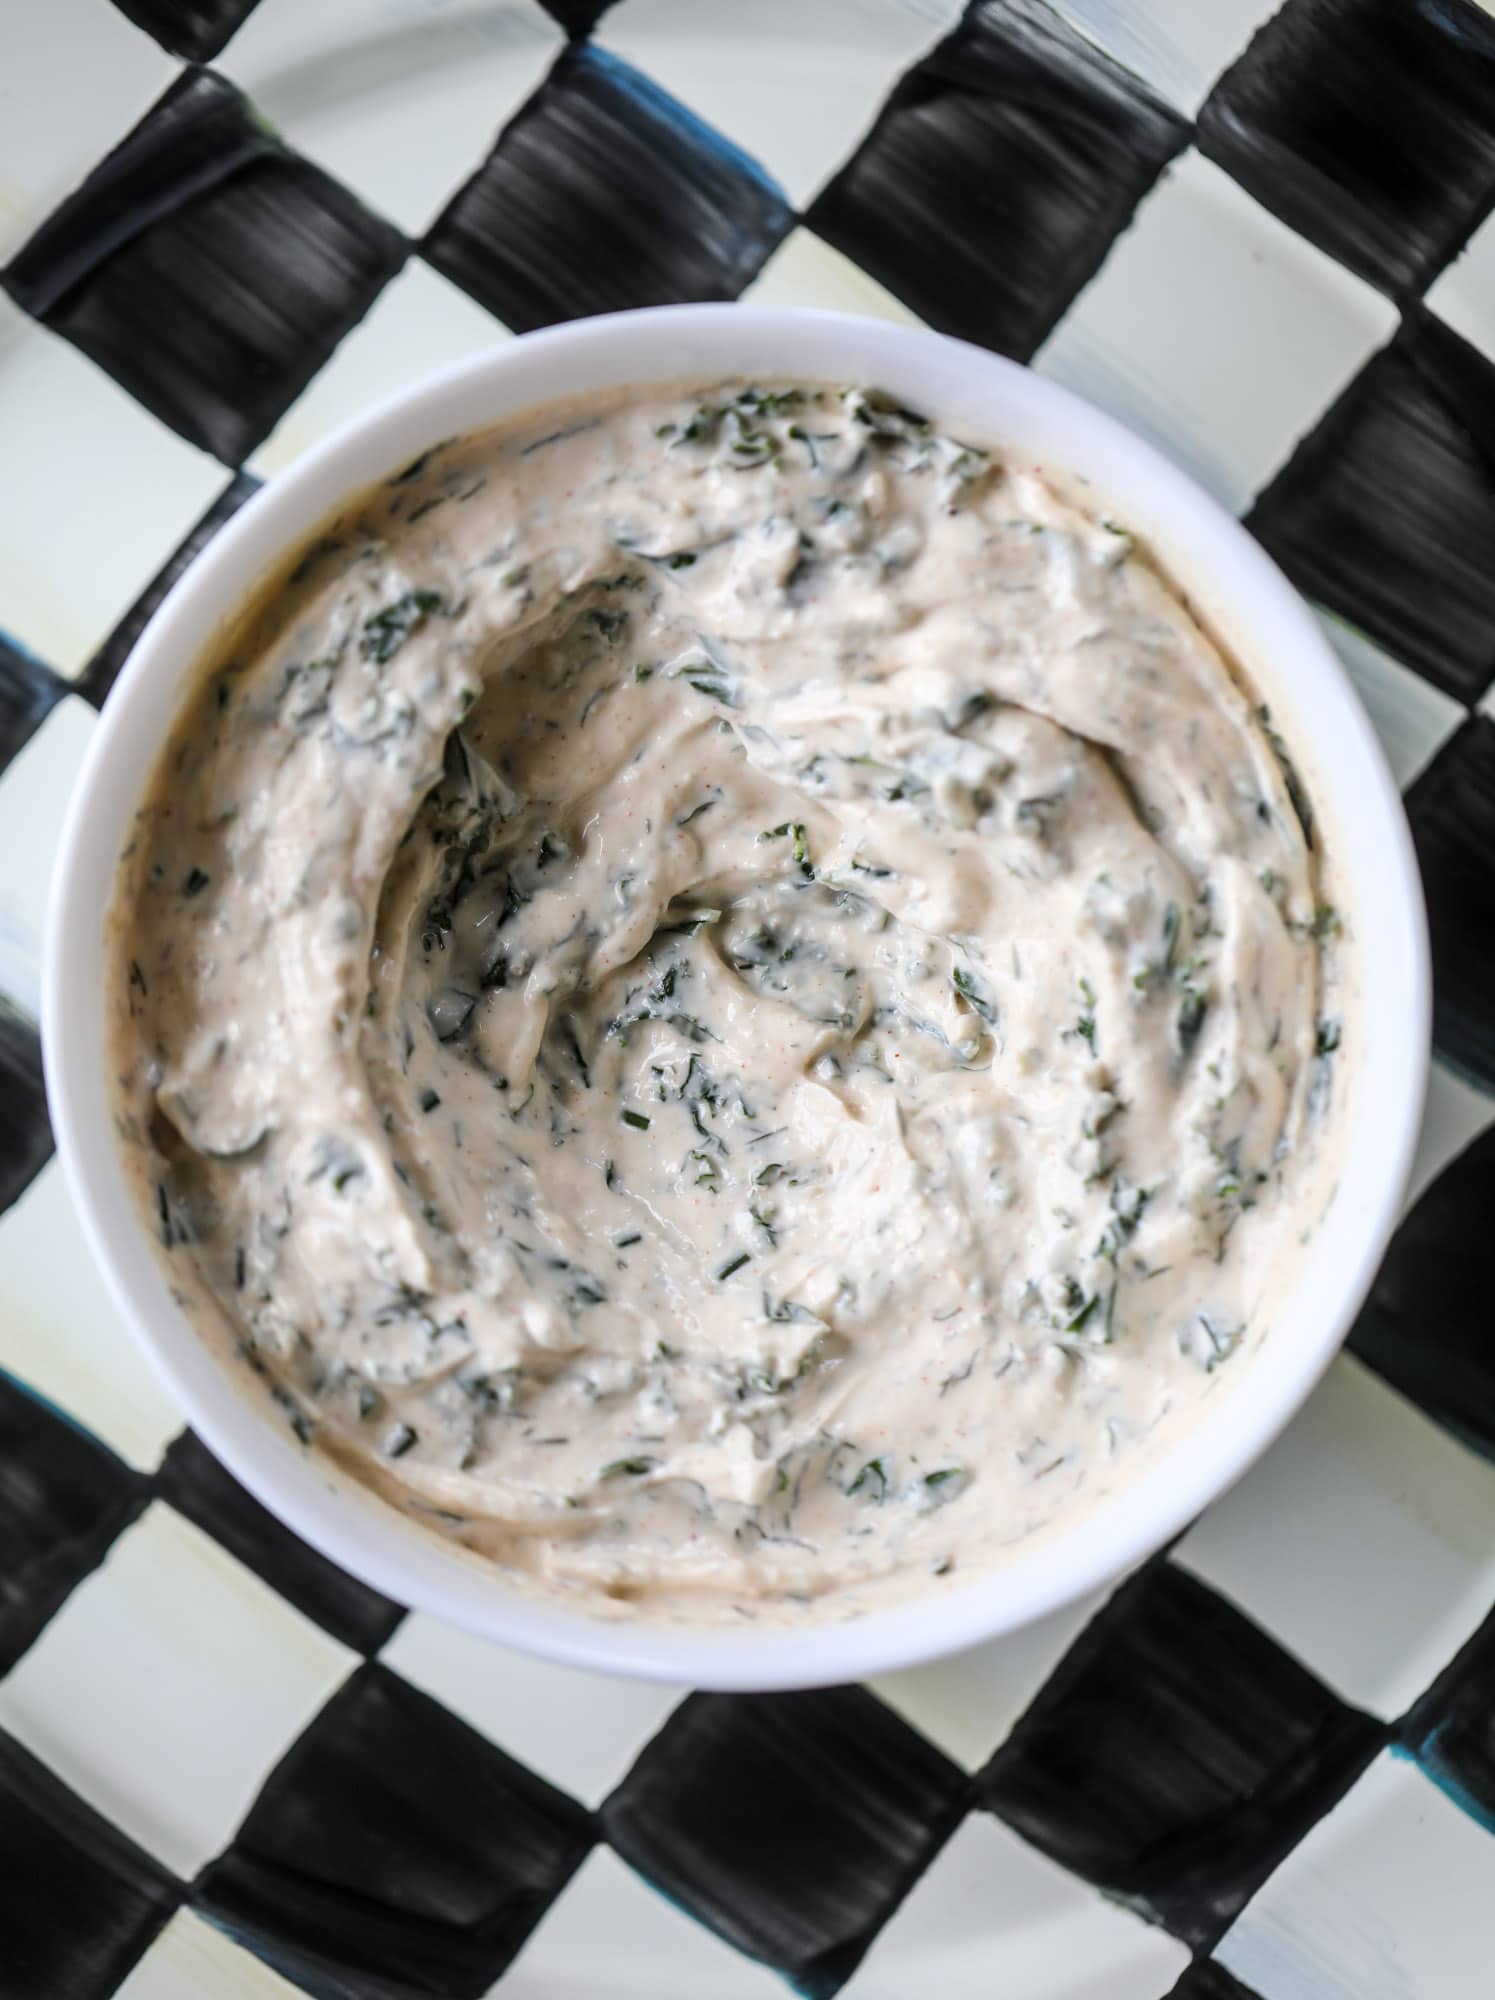 This greek yogurt ranch dip is fabulous for a summertime pool tip and it's full of greens! Made with a homemade ranch spice seasoning, lots of shredded greek kale and greek yogurt, it's the perfect dip for crudite or chips! I howsweeteats.com #kale #greek #yogurt #ranch #dip #healthy #snacks